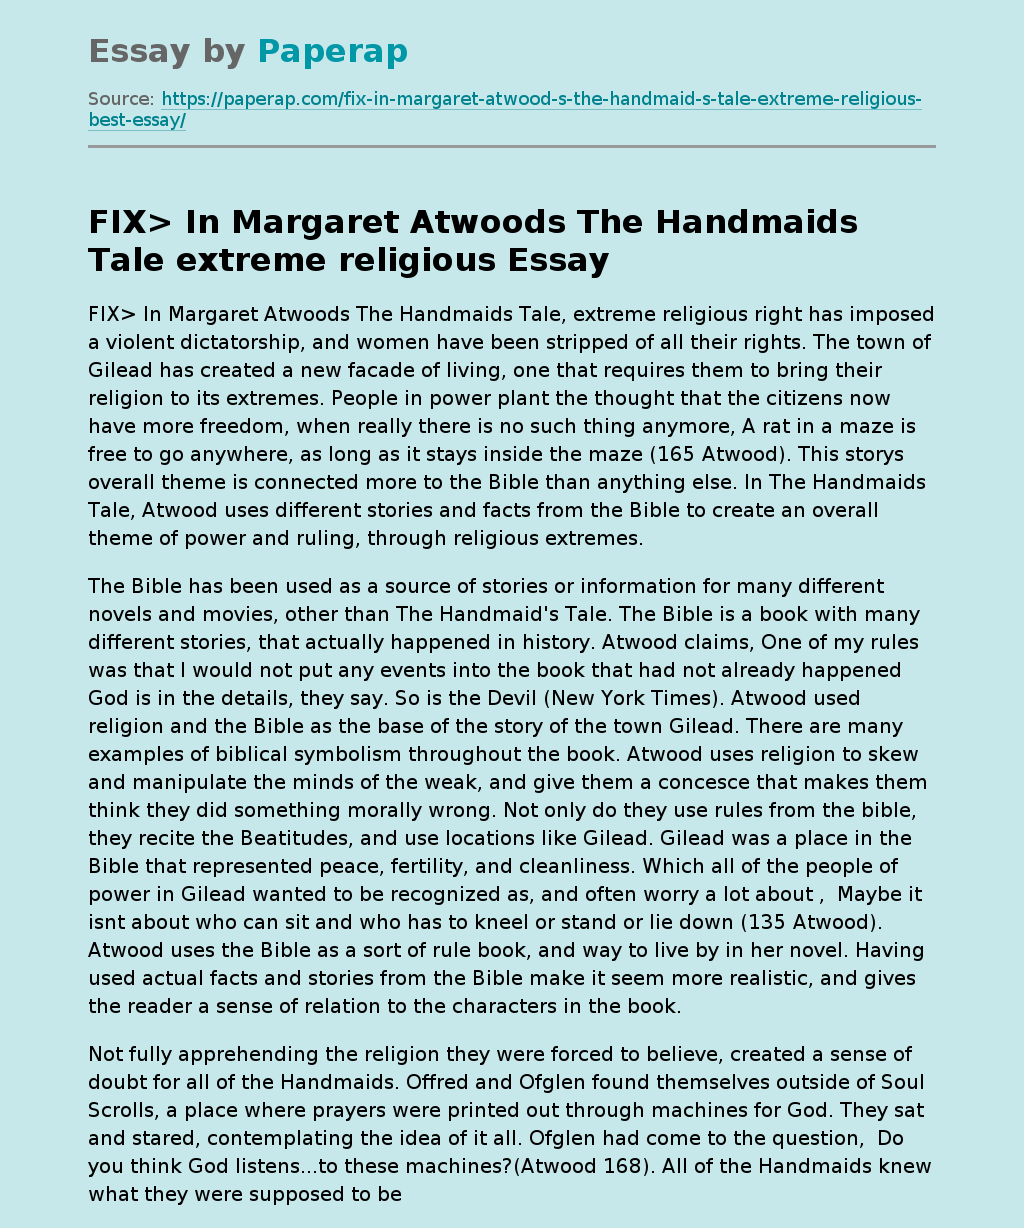 In Margaret Atwoods The Handmaids Tale Extreme Religious